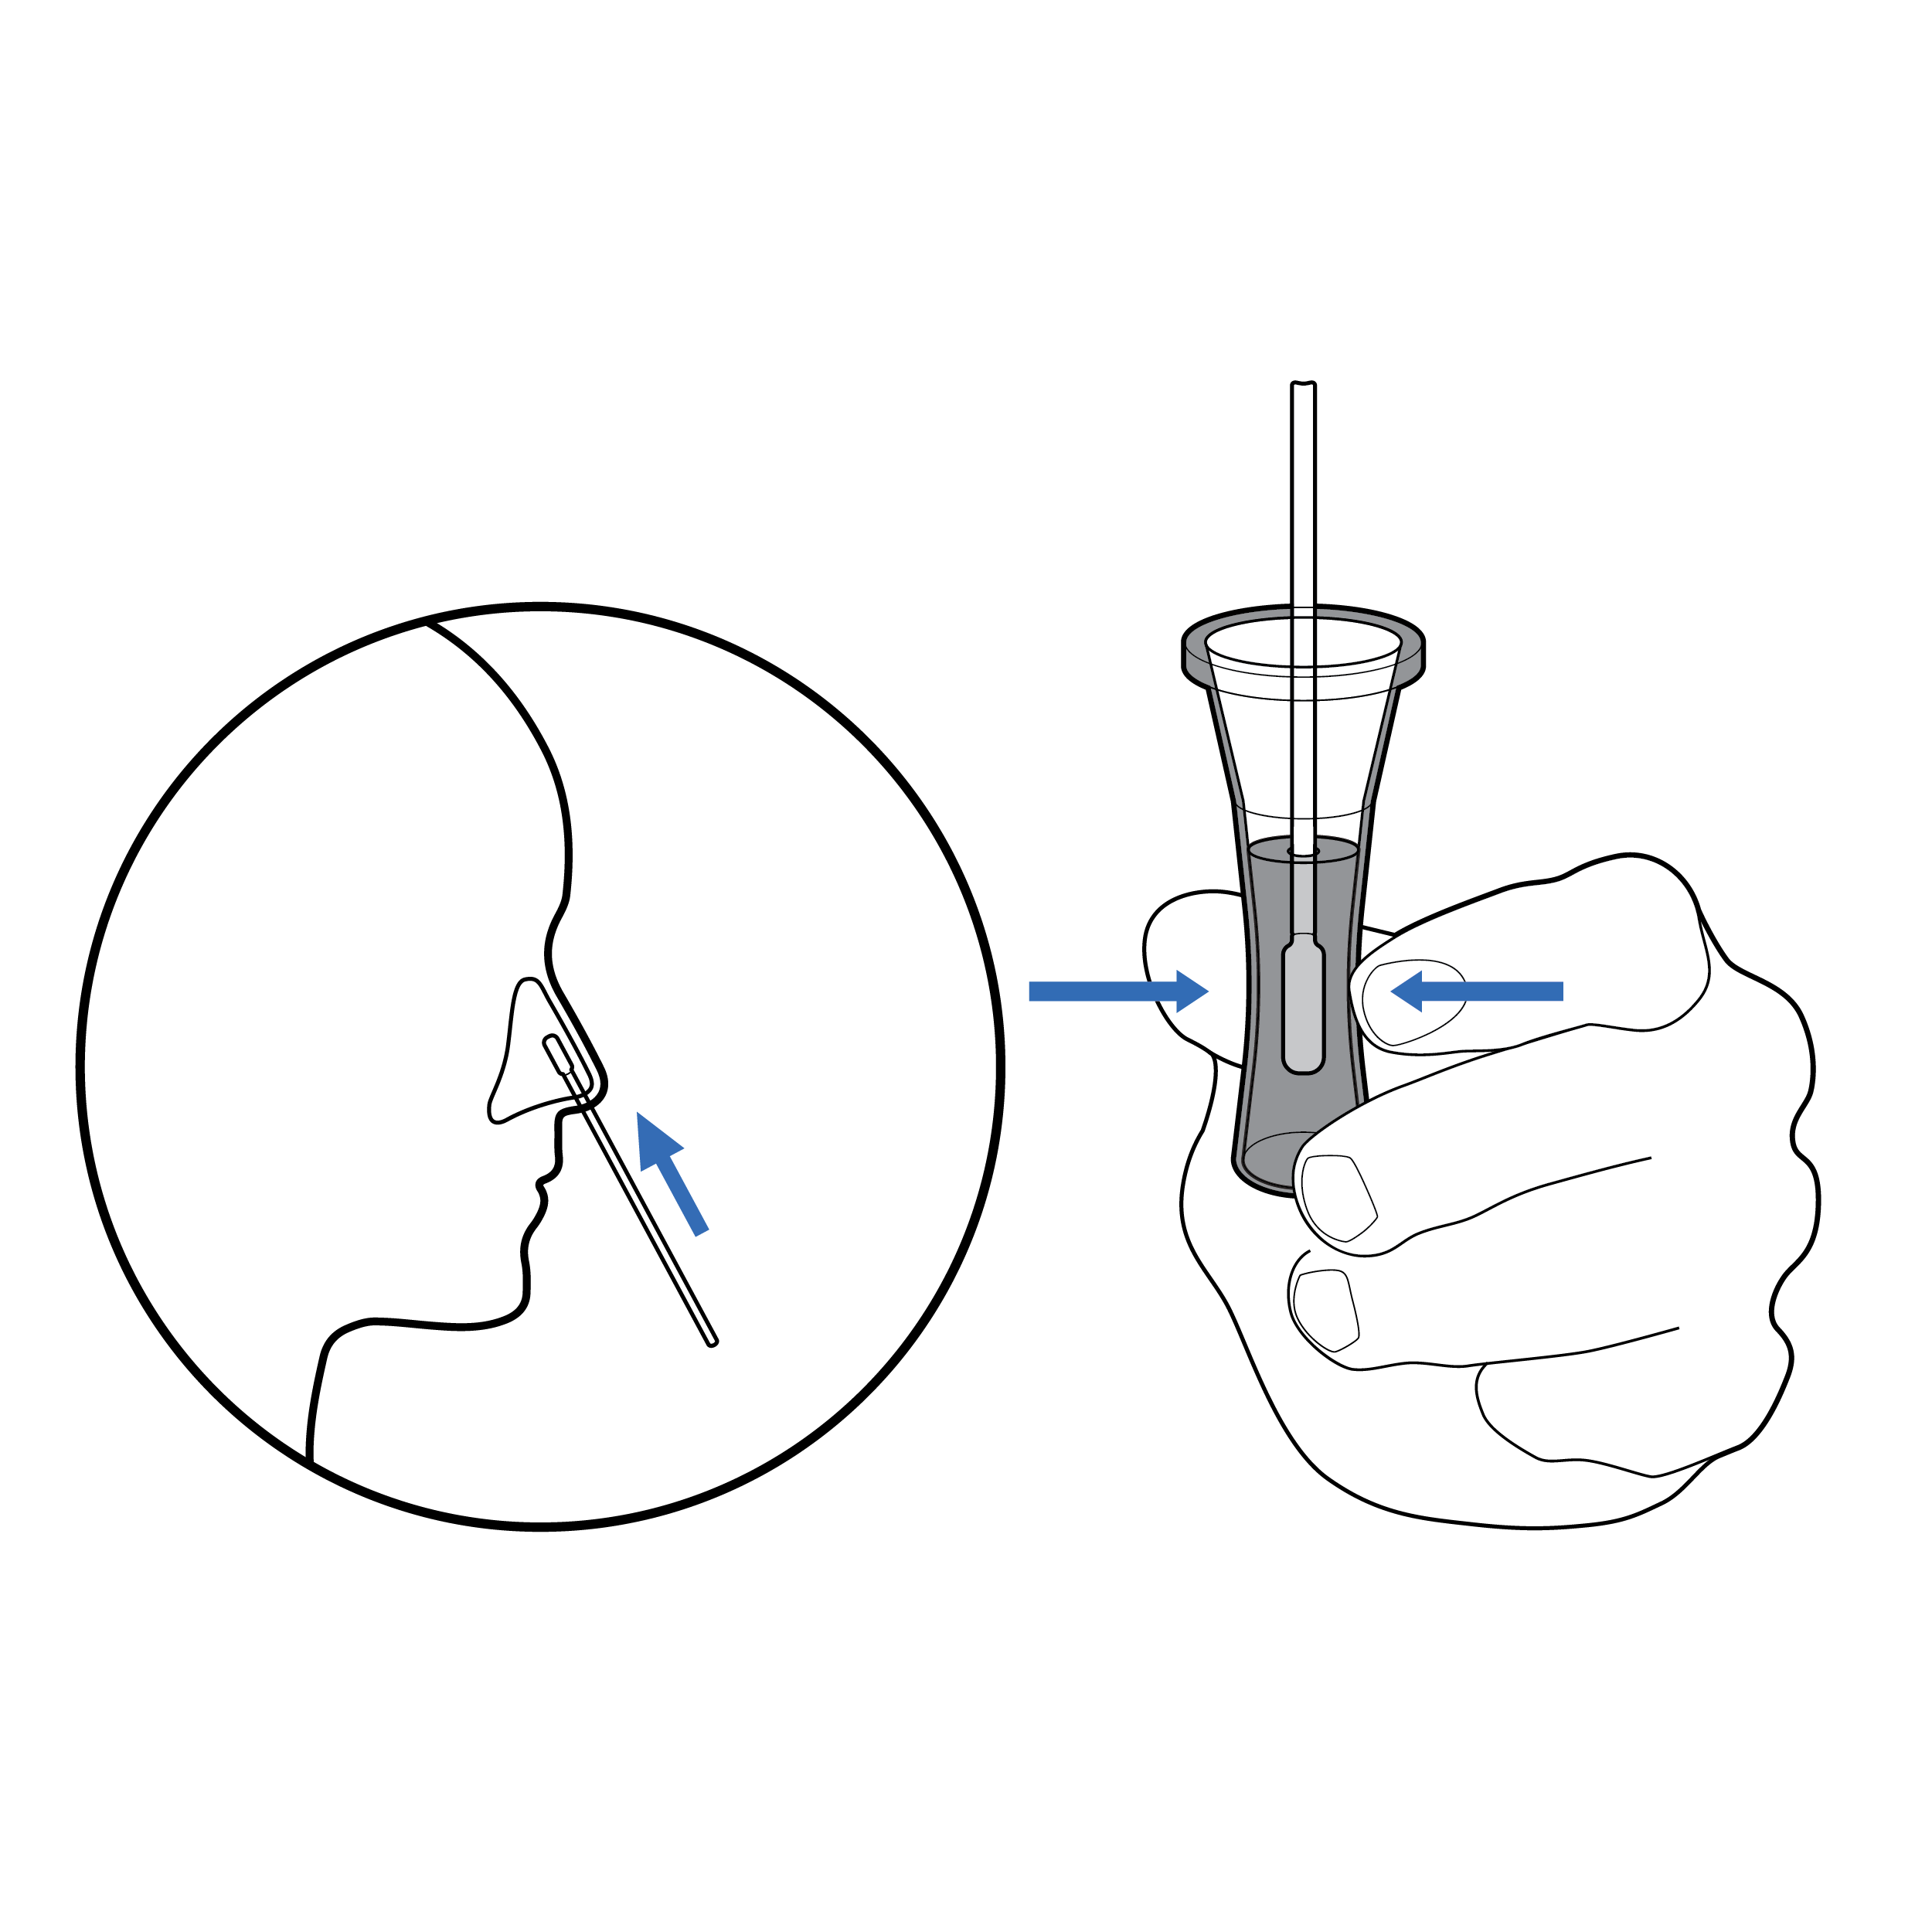 Line drawings of a swab inserted into a nostril and a fluid vial held between fingertips with blue arrows.